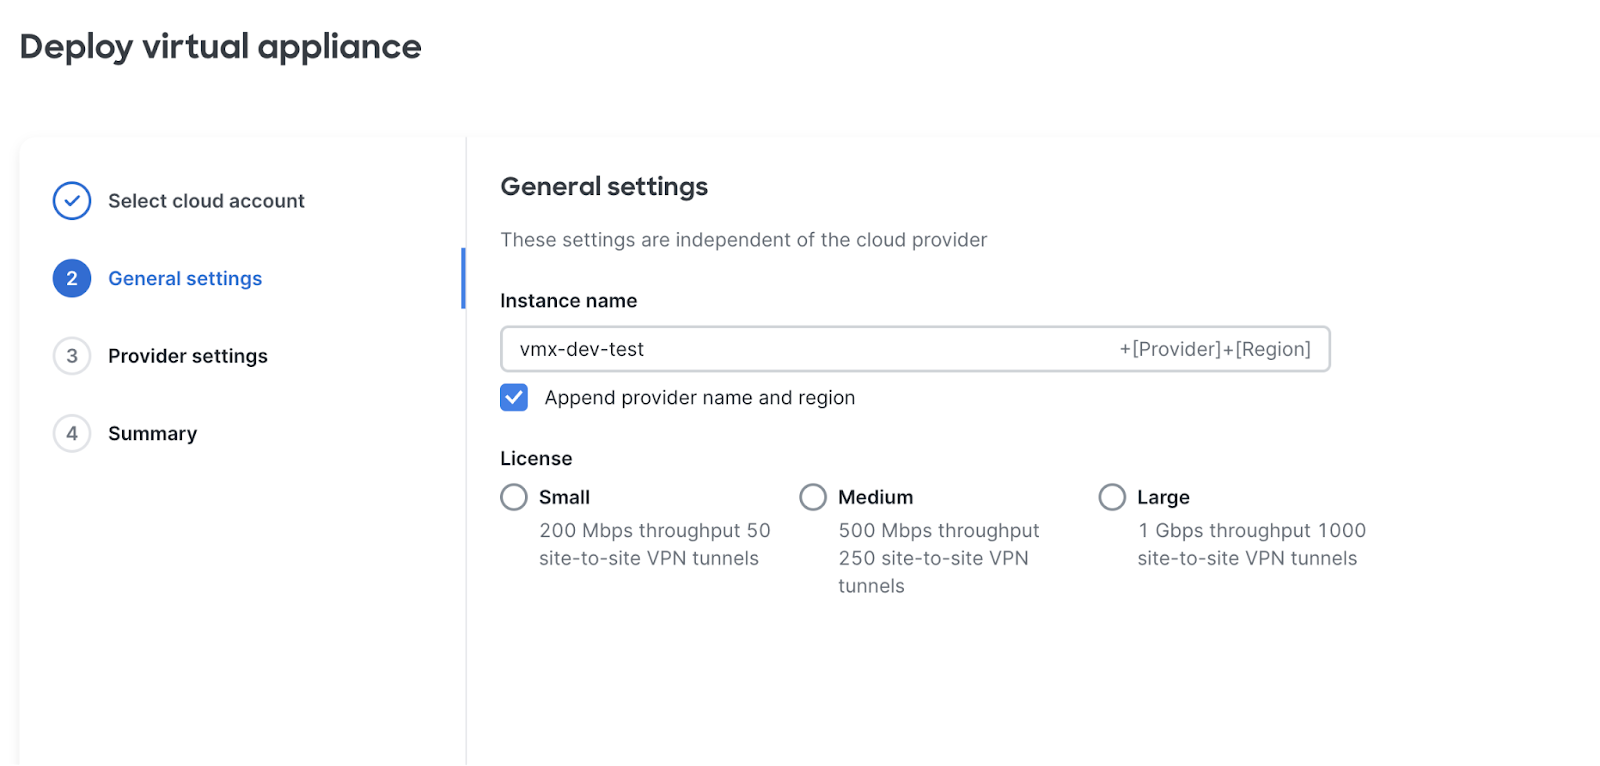 Dashboard UI Cloud integration - Deploy virtual appliance page at stage 2: General settings with an example instance name "vmx-dev-test" and Append provider name and region option checkboxed 